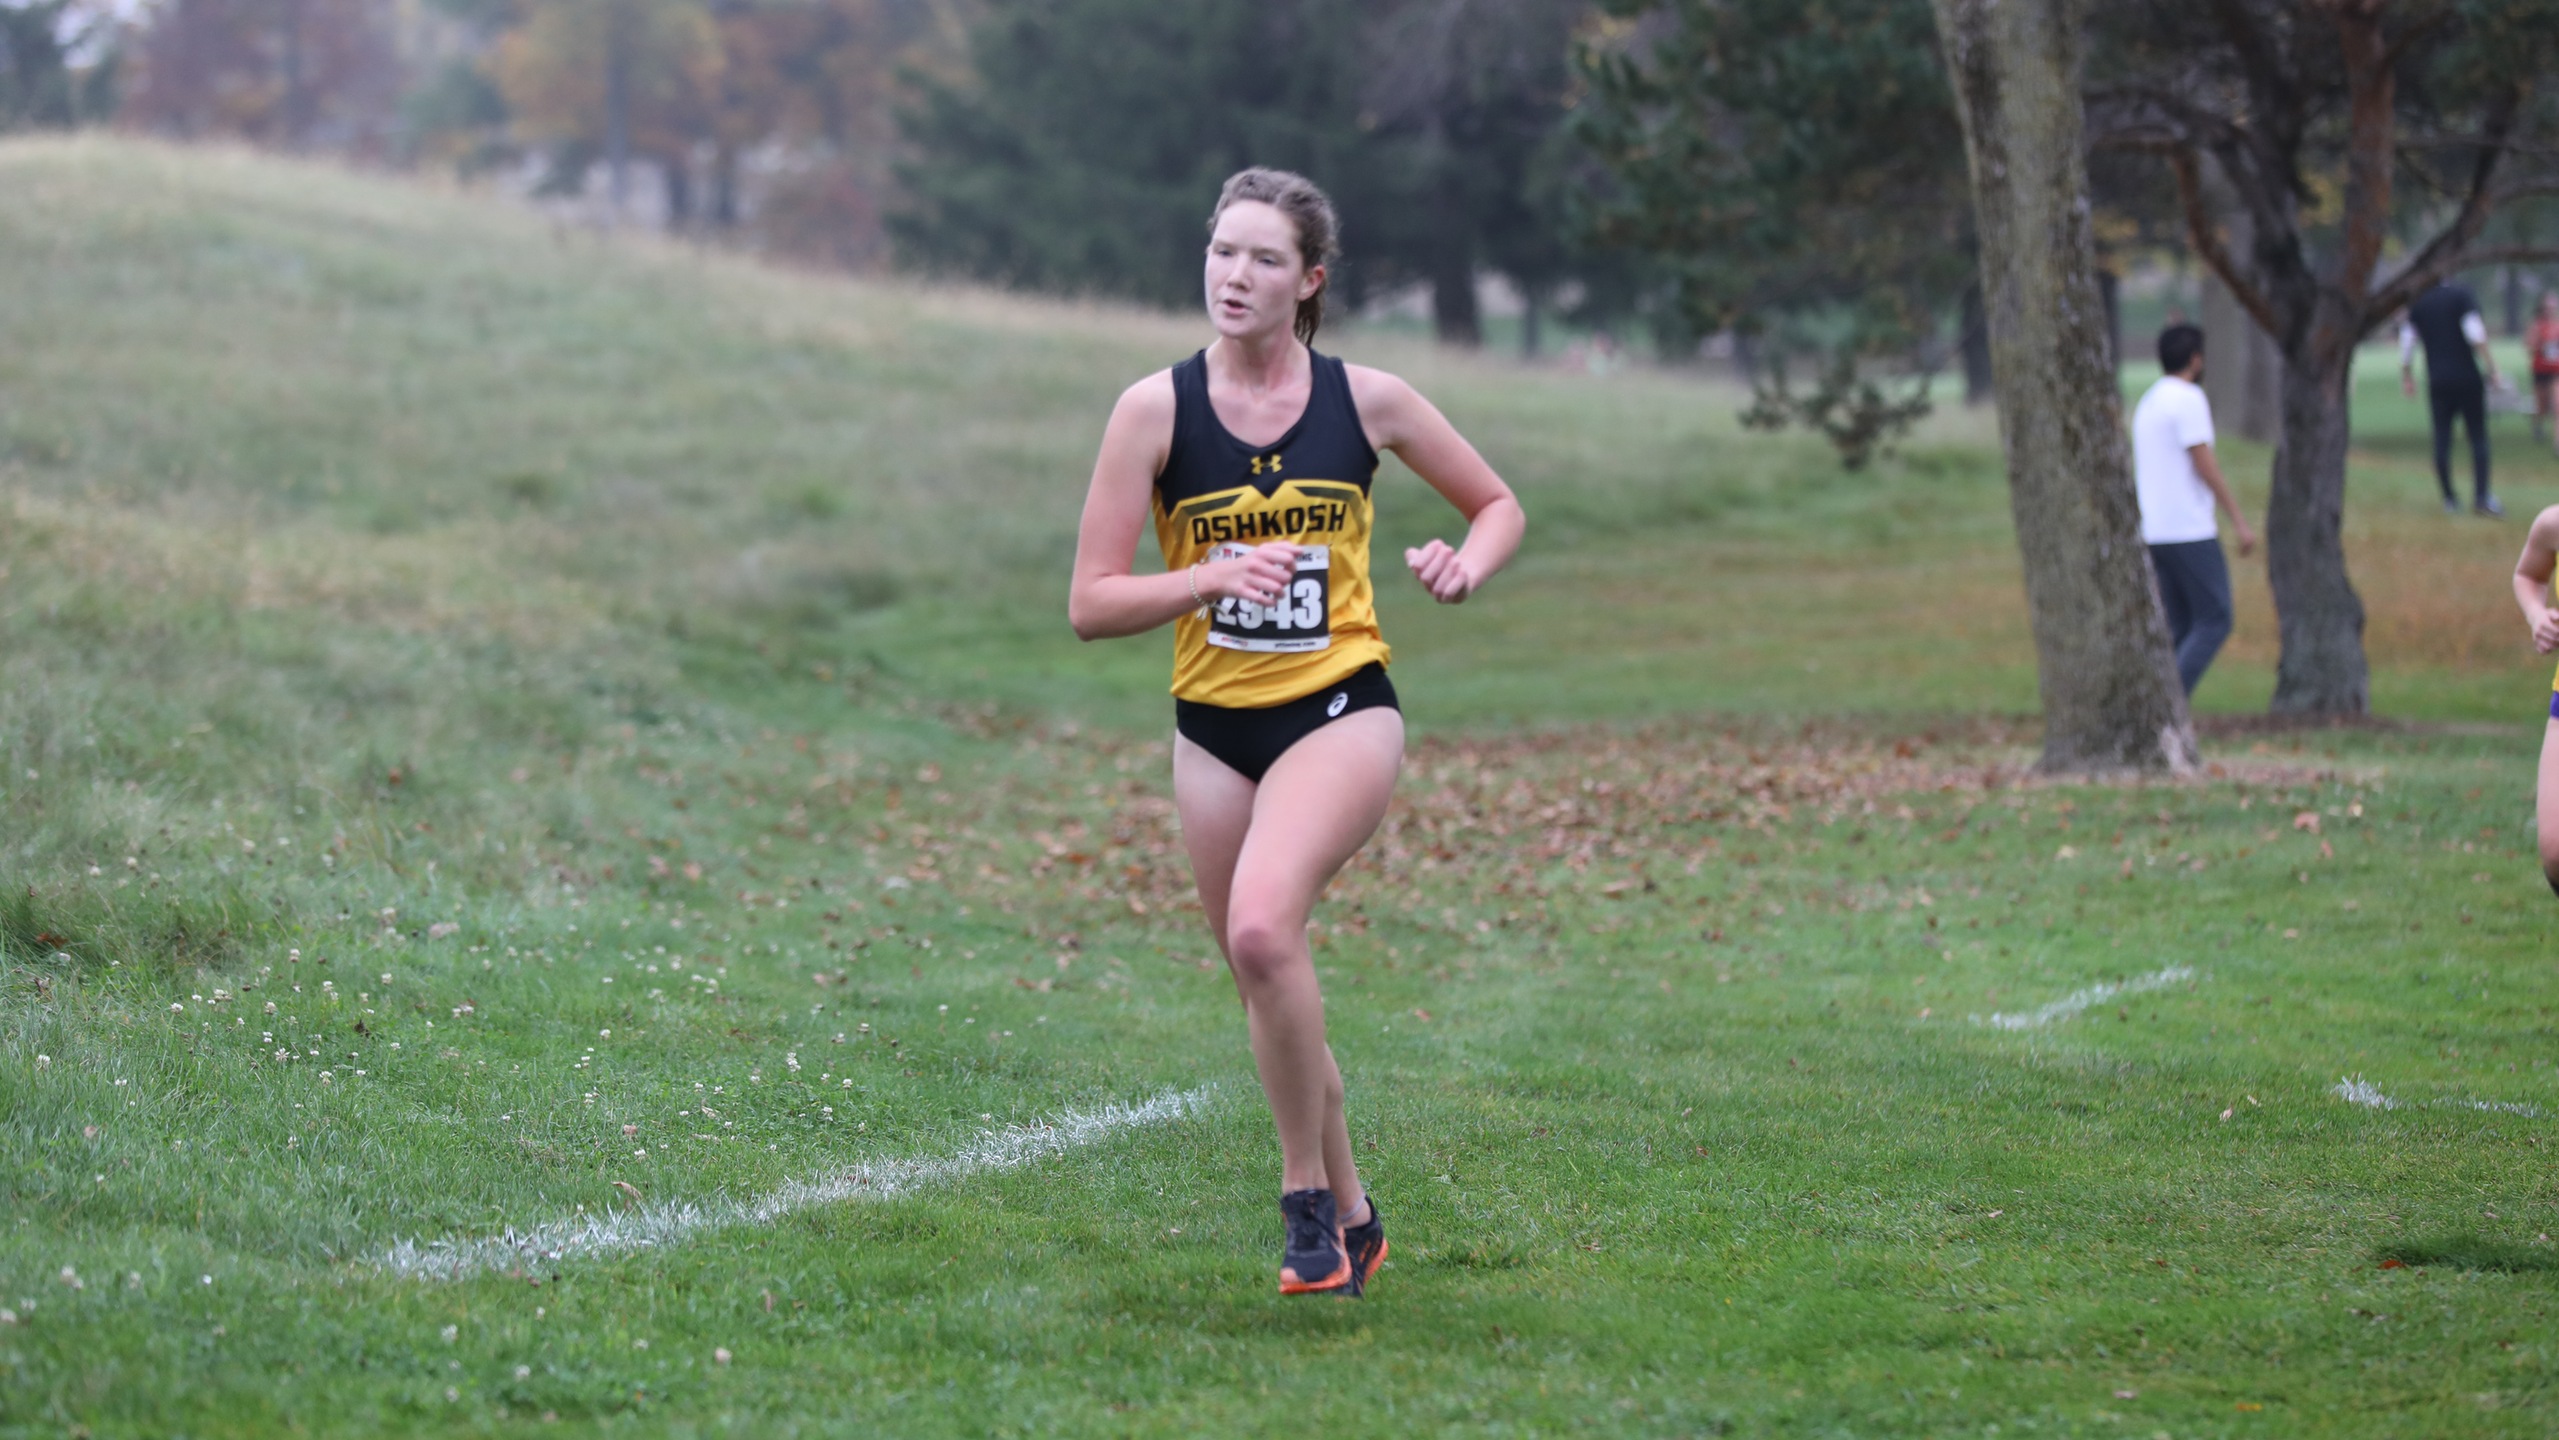 Tricia Cich led the Titans with her 12th-place finish at the Gene Davis Invitational.